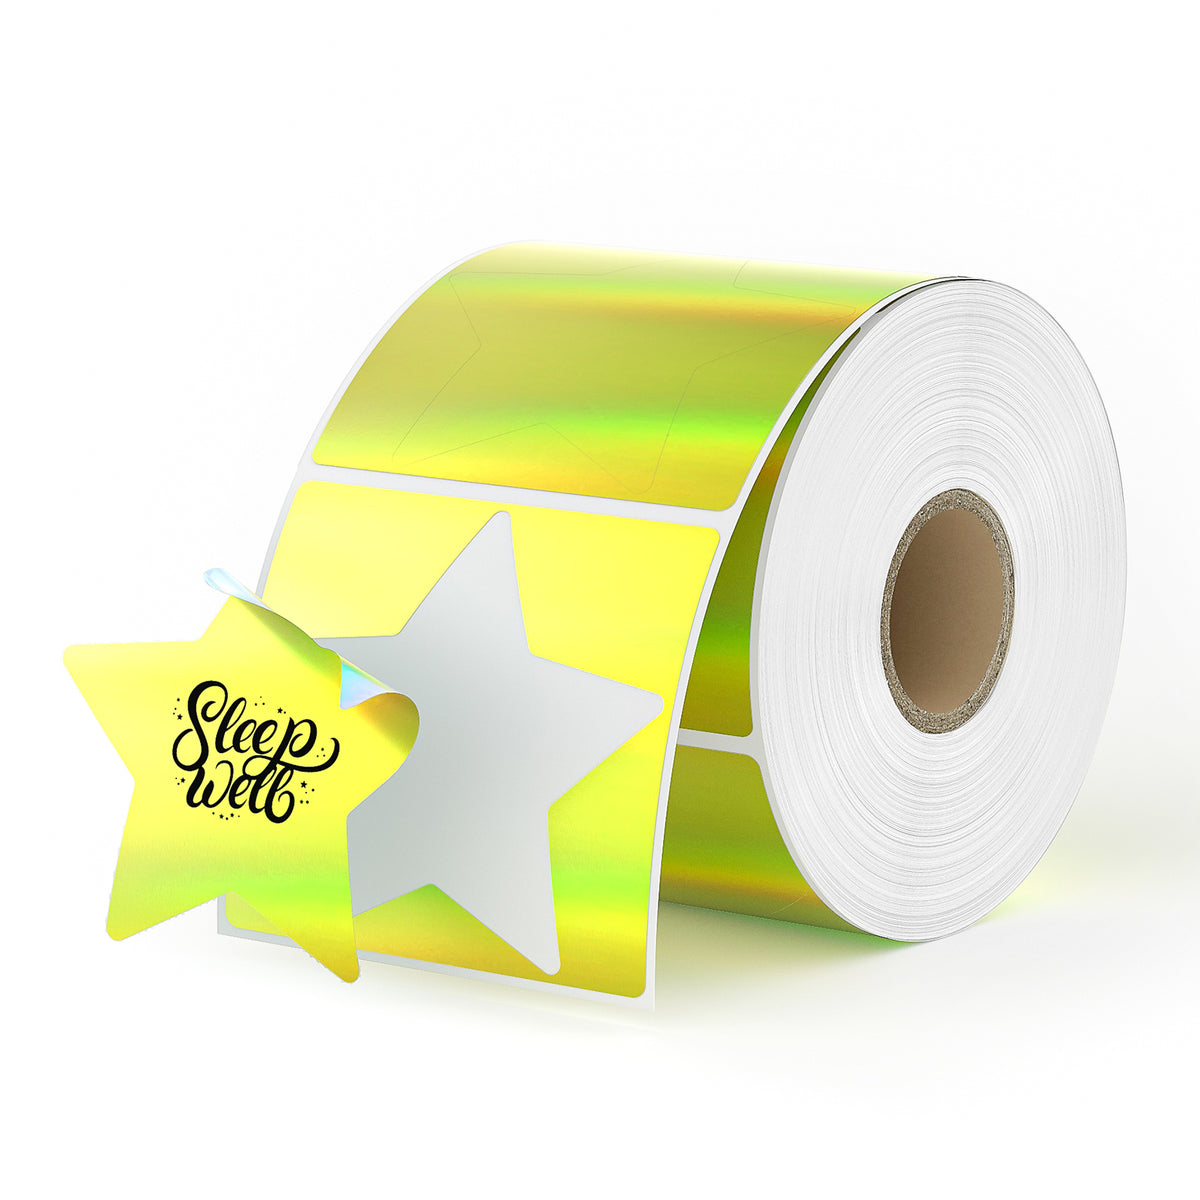 MUNBYN gold holographic thermal labels come in a striking 3-inch star shape, adding a touch of sparkle to any item.